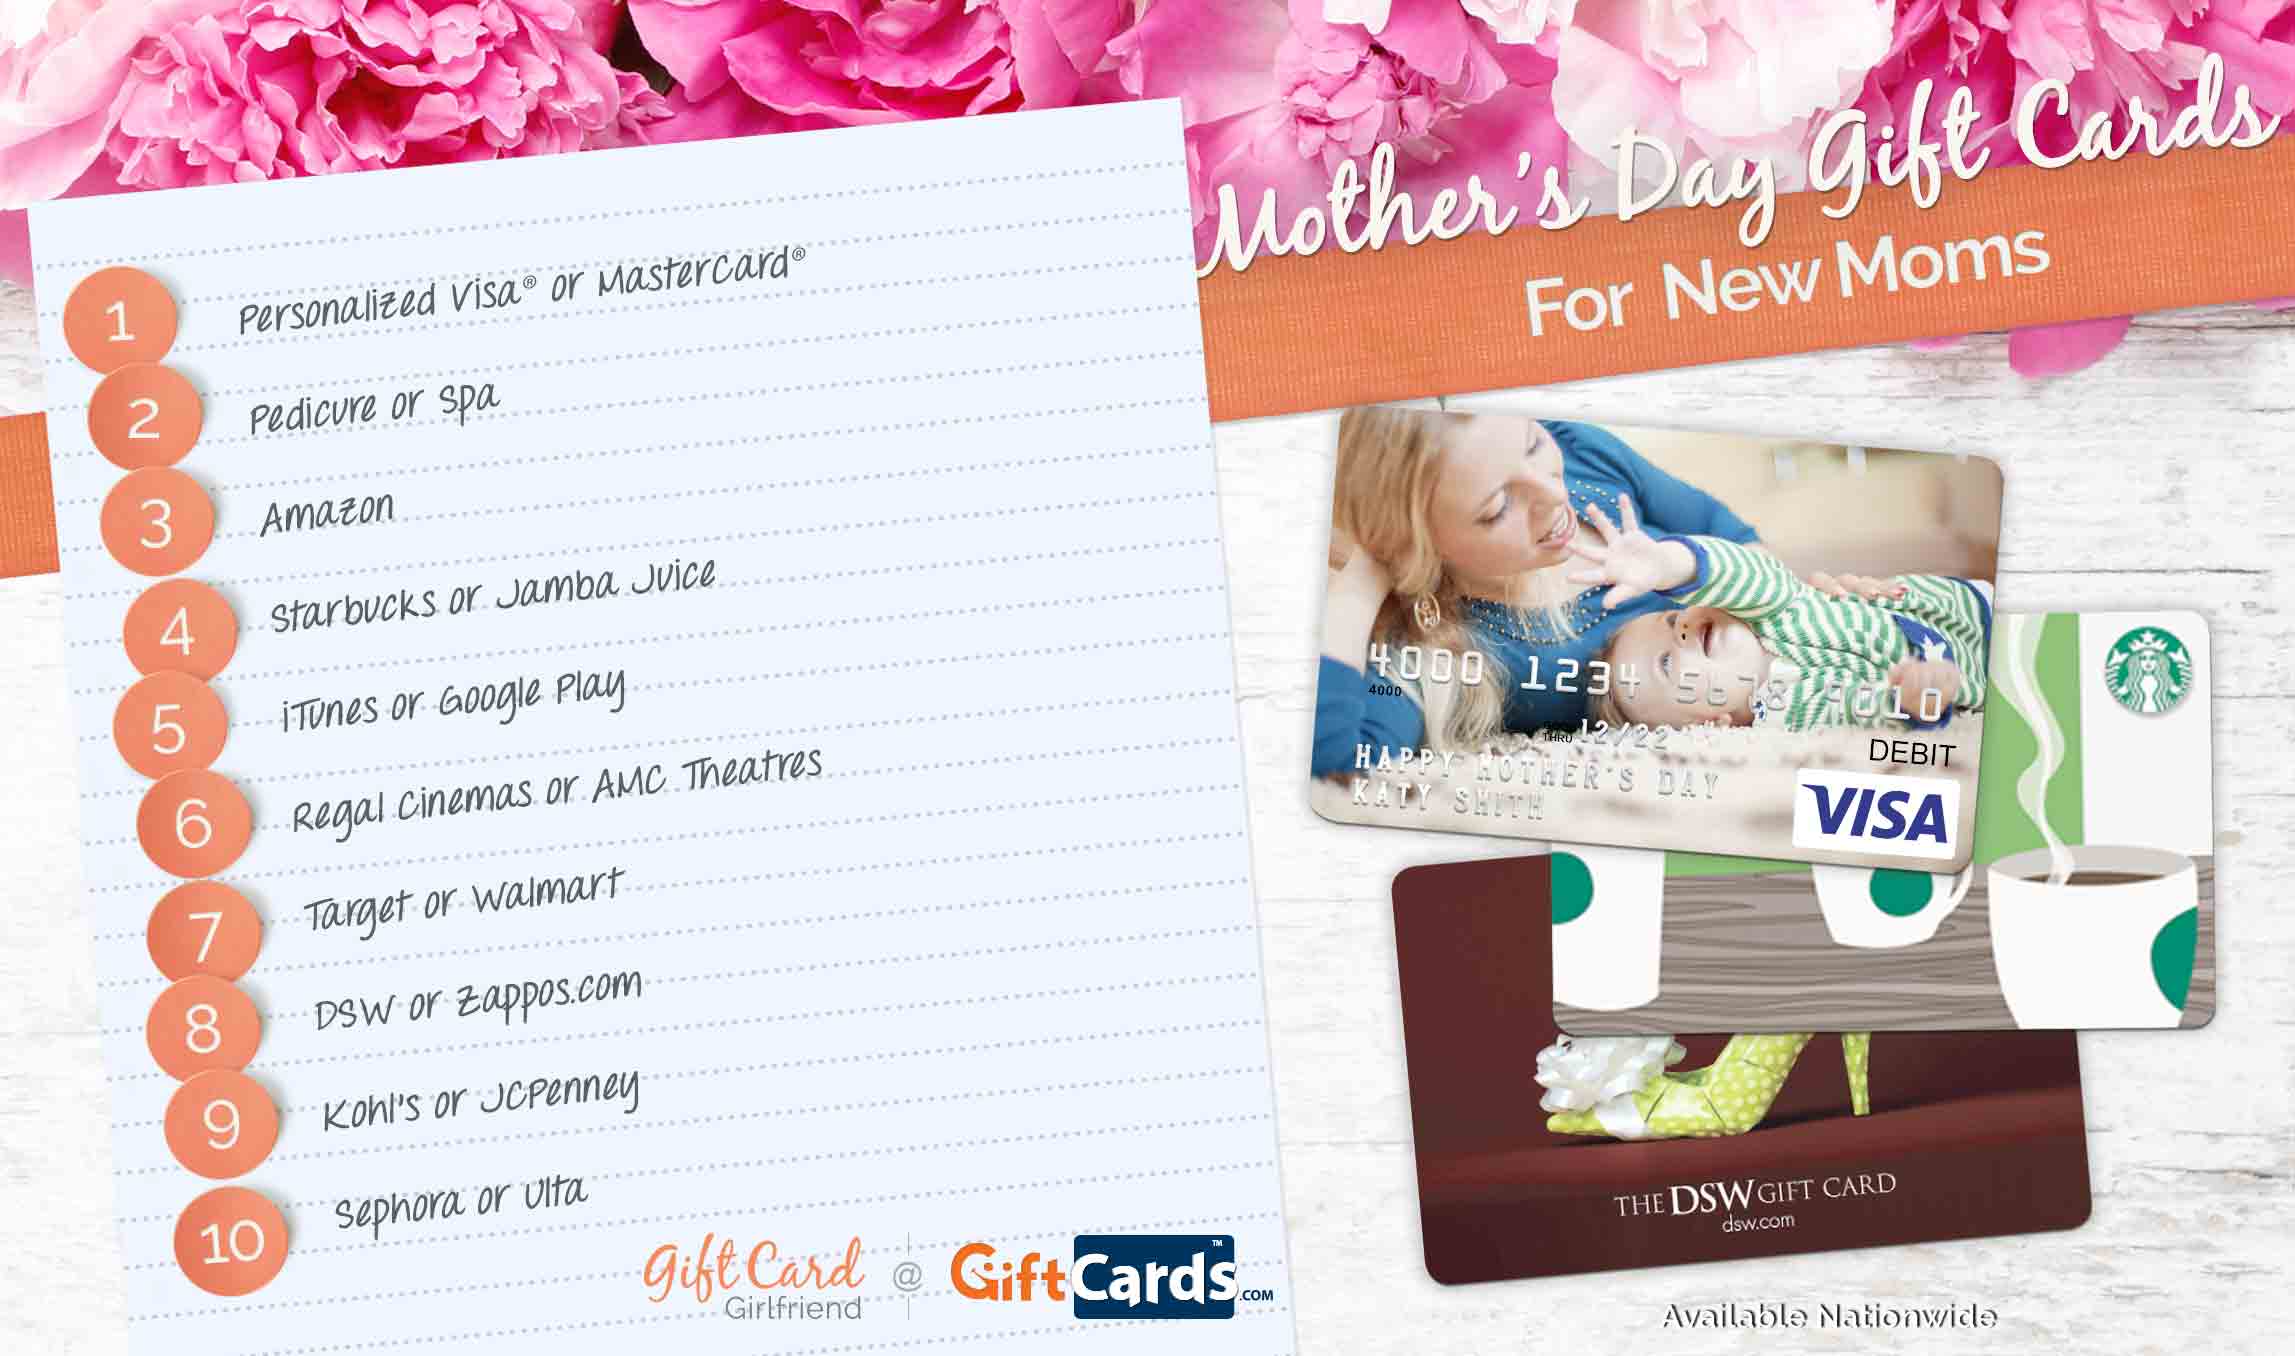 Top 10 Mother's Day Gift Cards for New Moms GCG